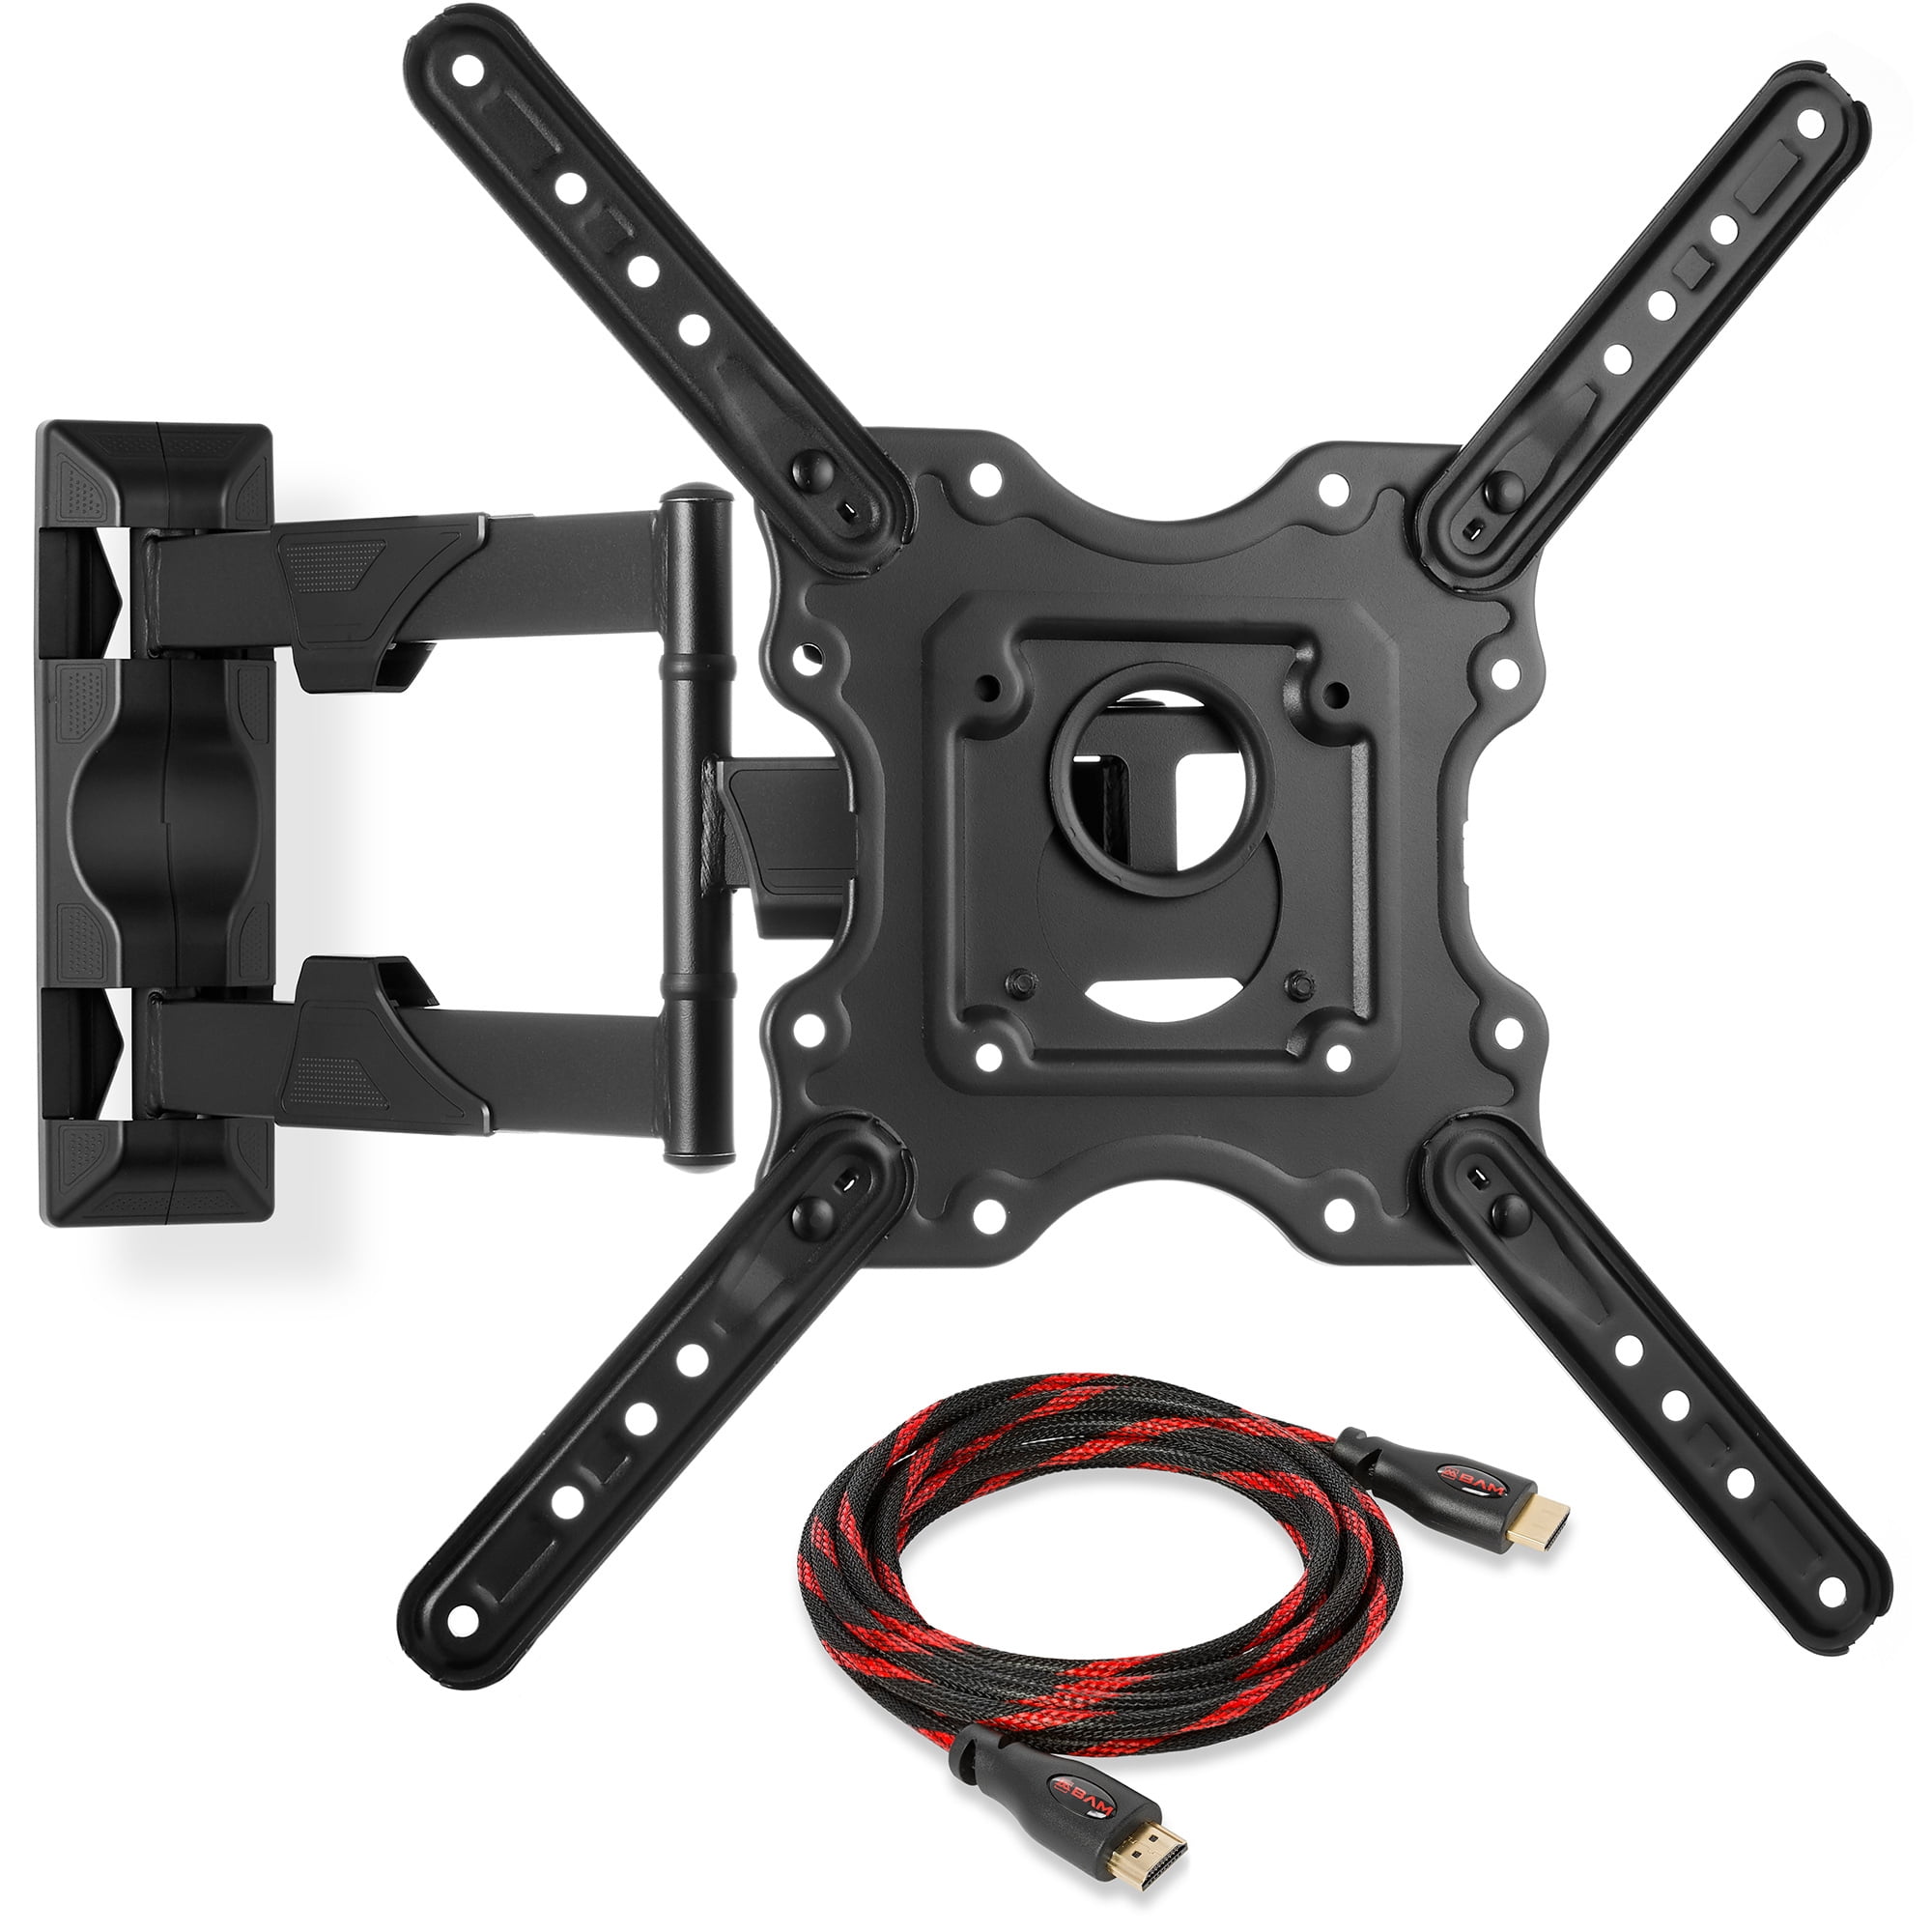 42" LED LCD Plasma Ultra Slim TV Wall Mount Bracket With HDMI Connector  15" 